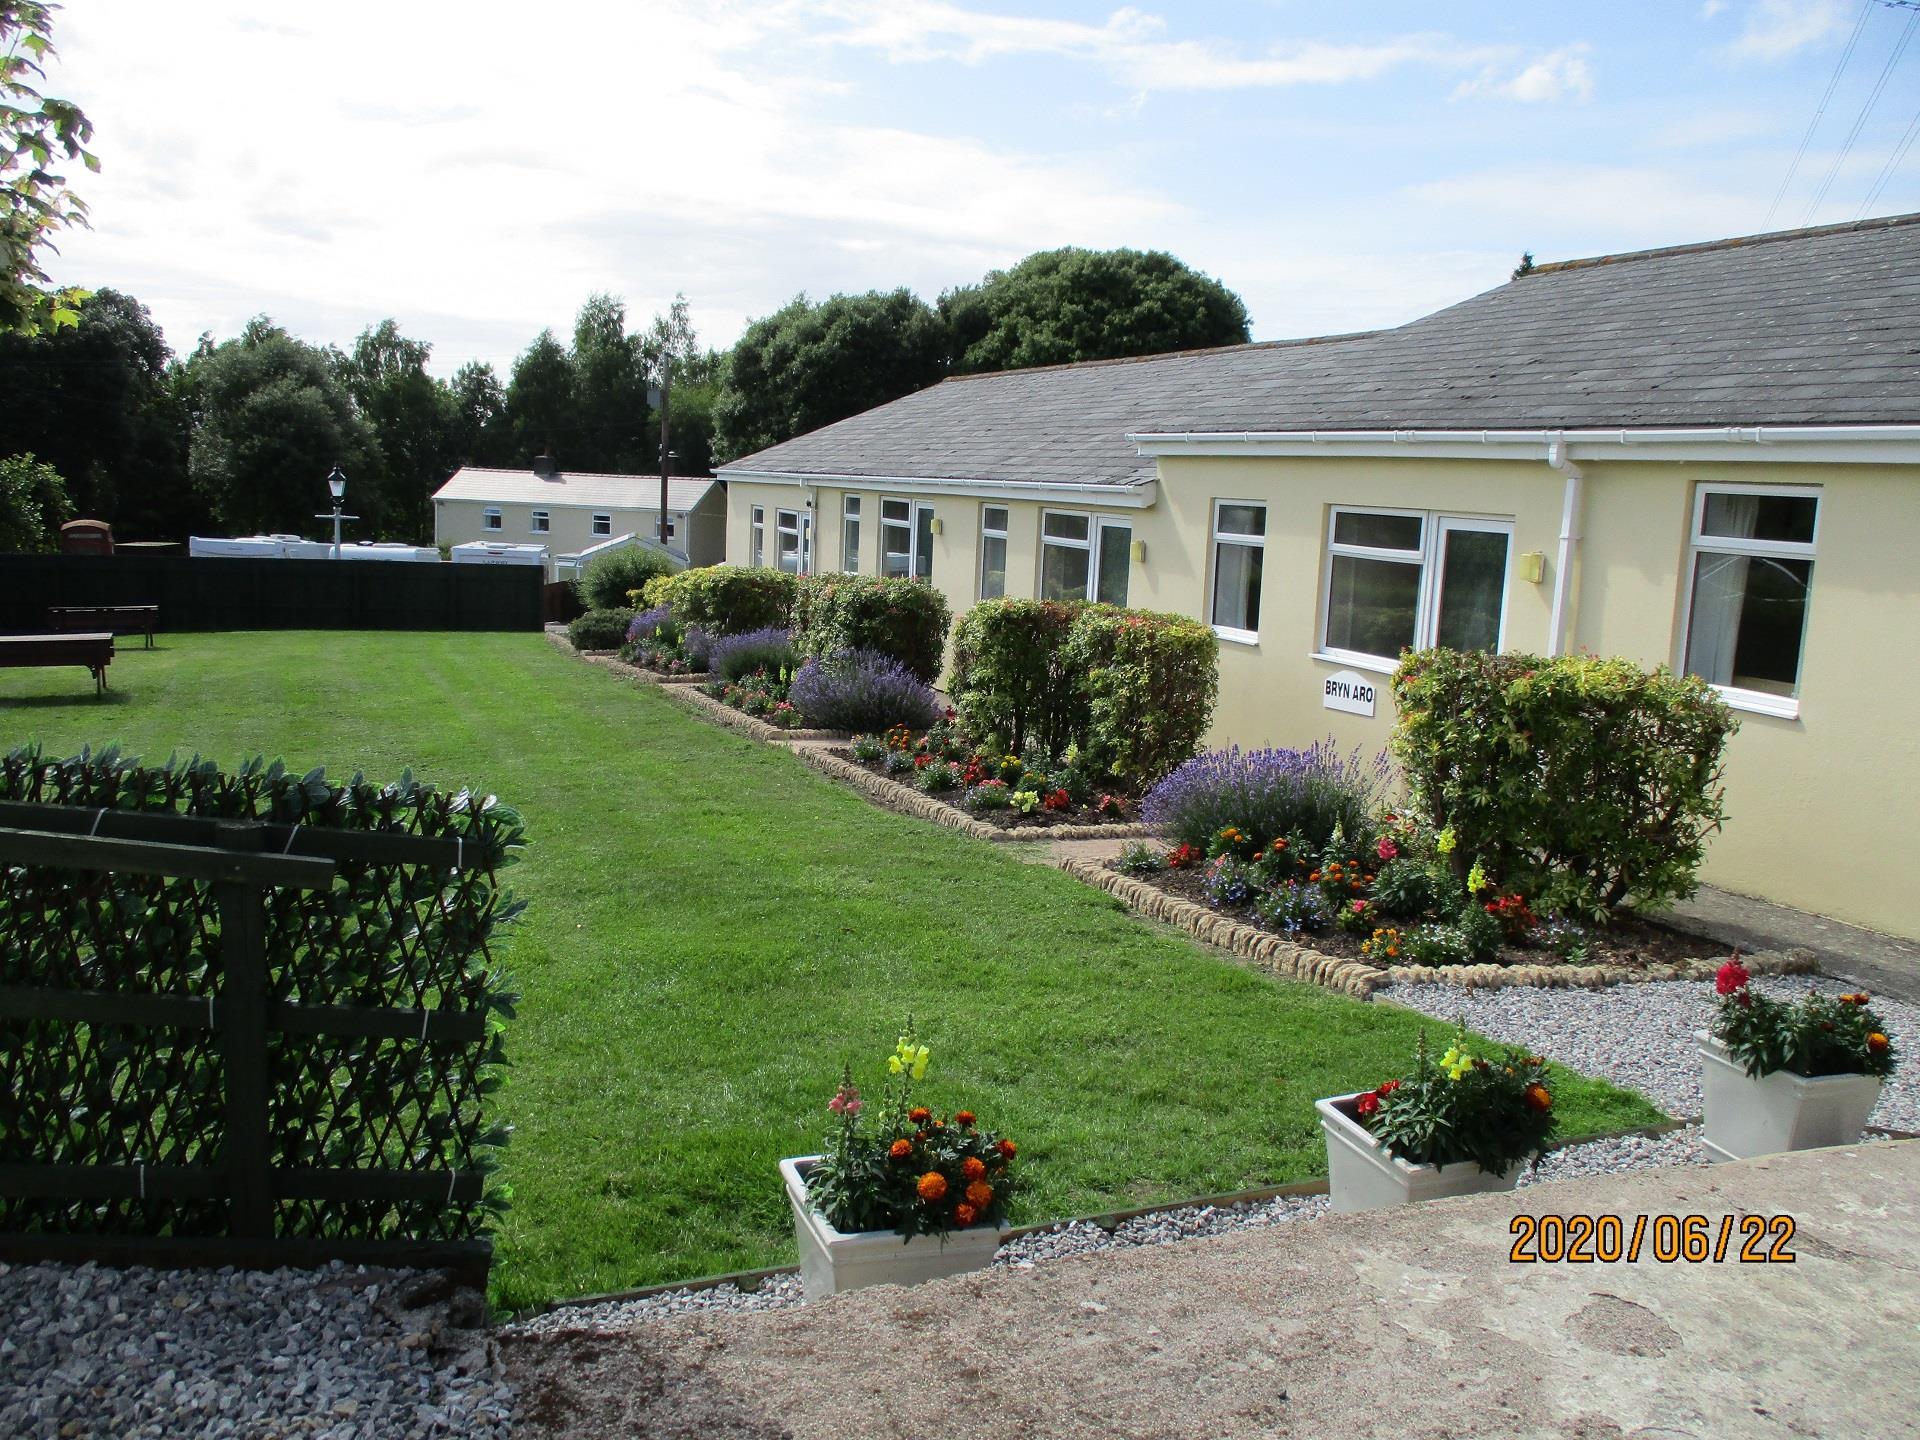 Photos of Outside the Cottages